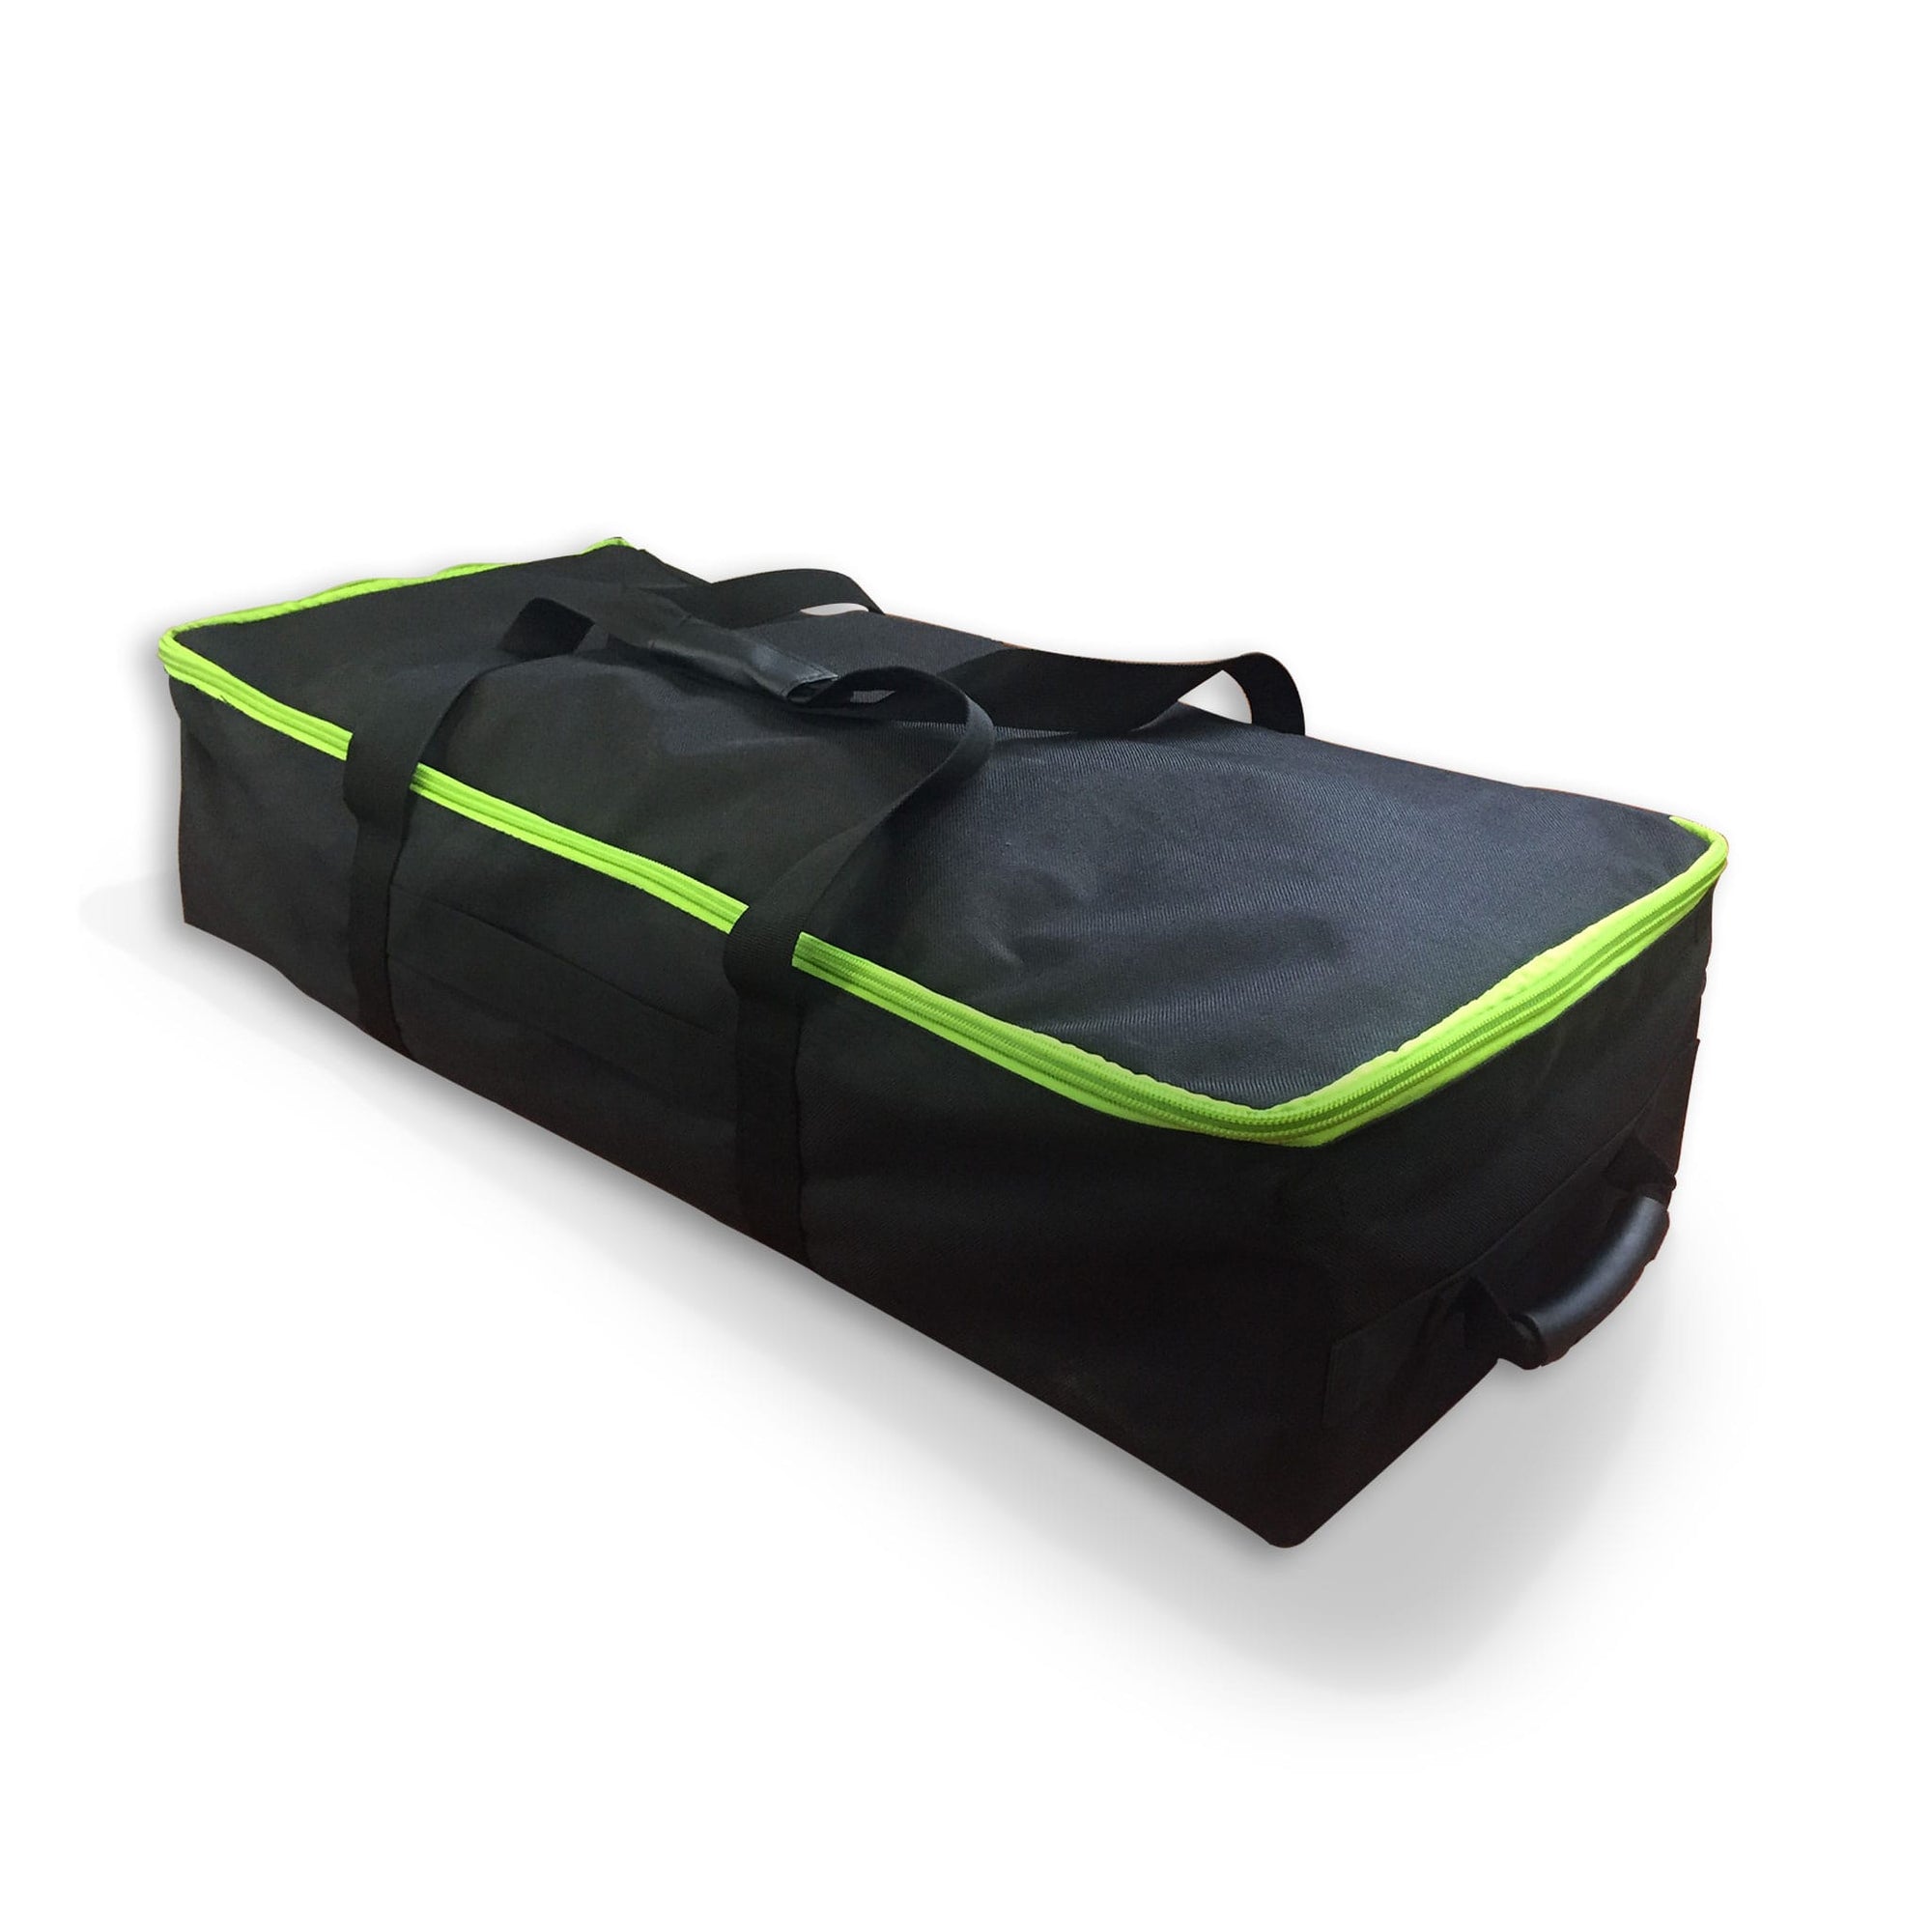 Carry Bag TRB039 - For Xperience